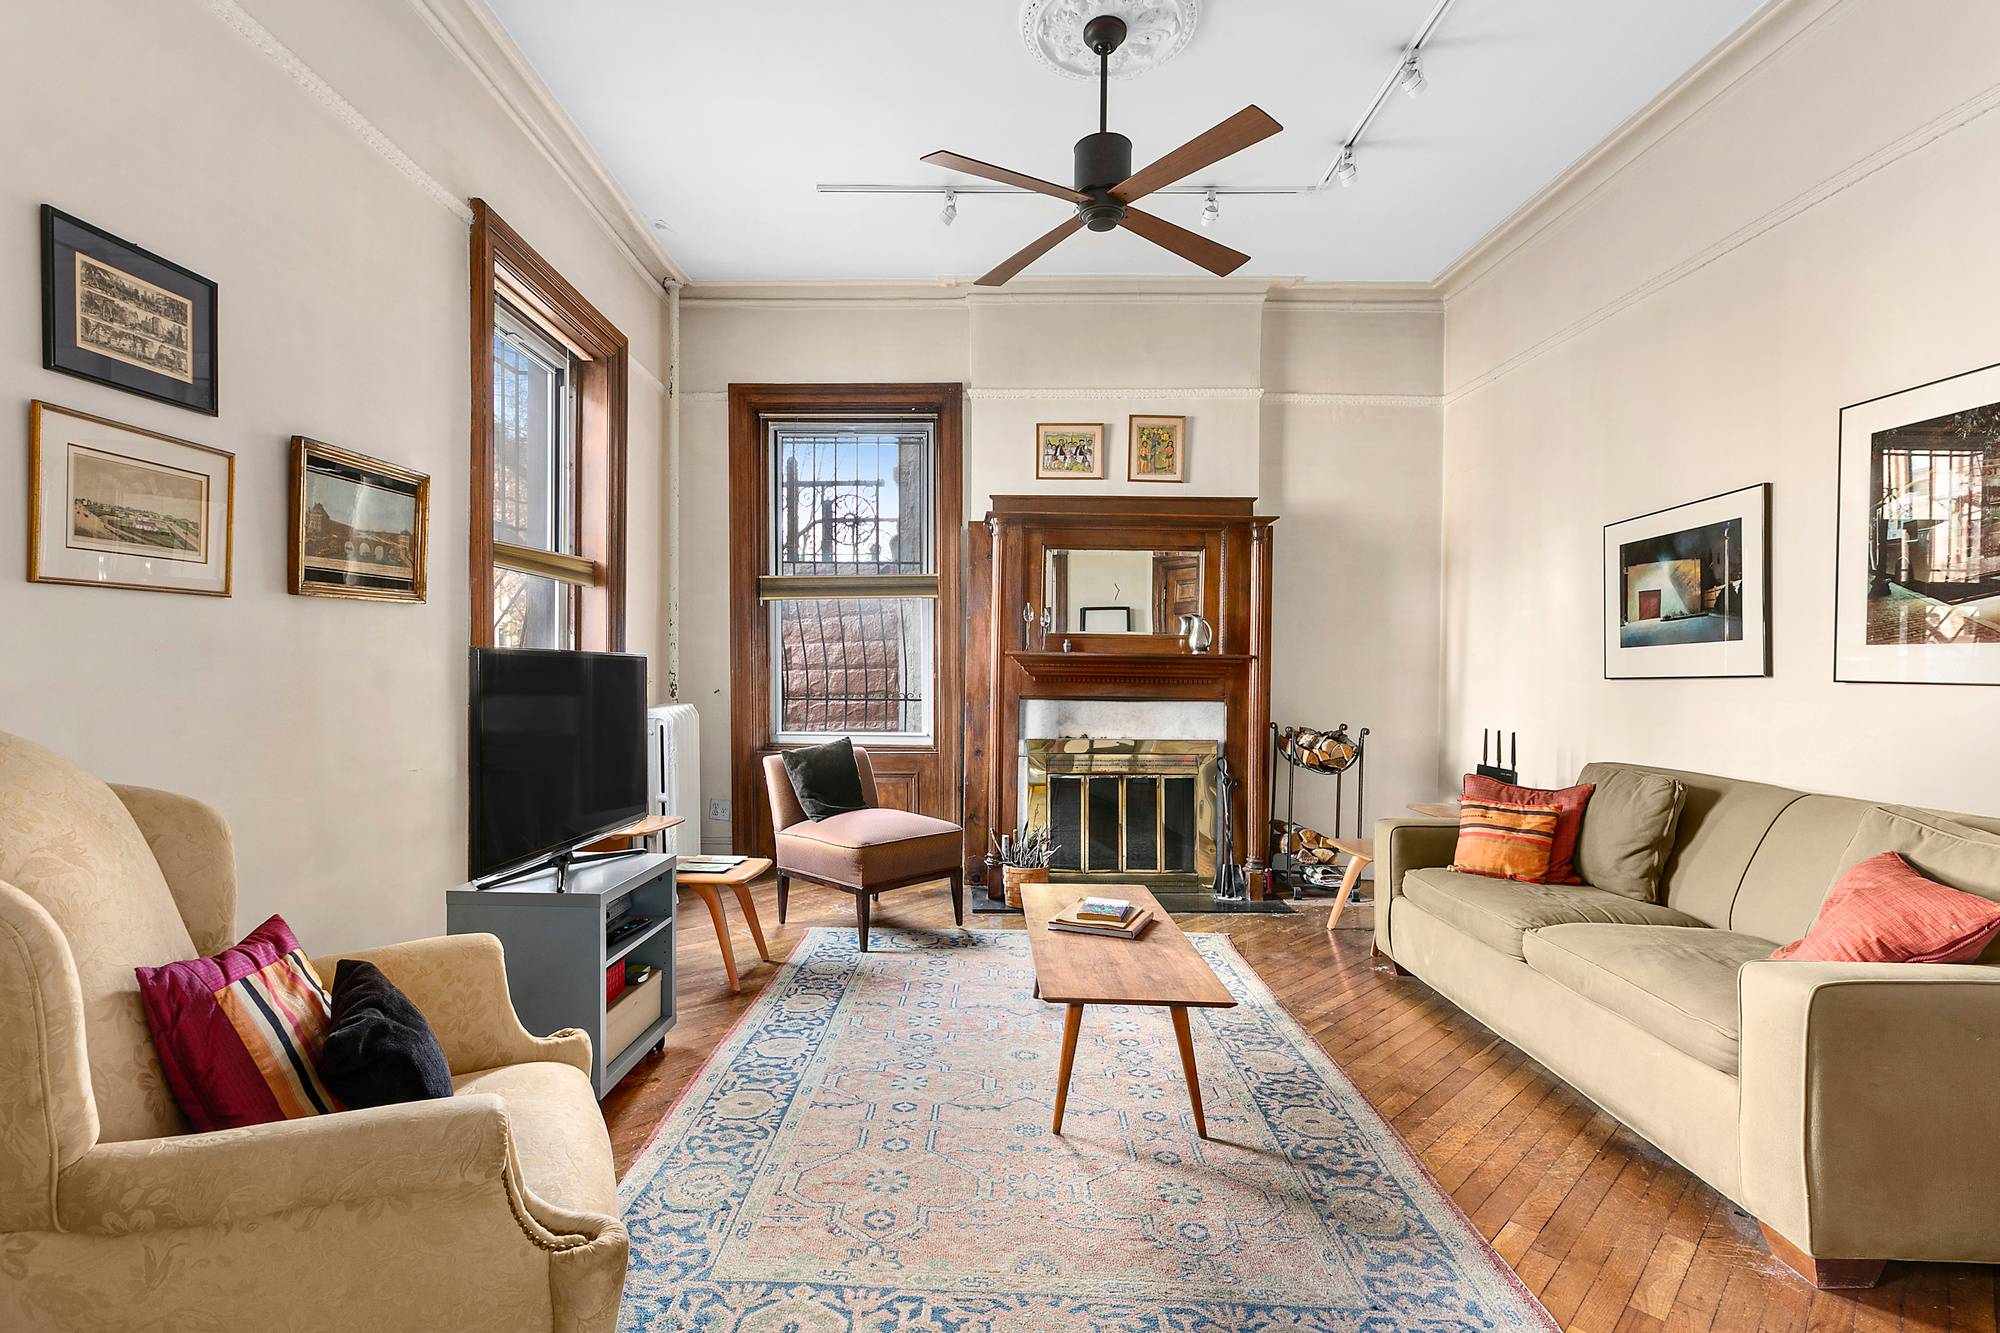 Welcome to this rare and elegant duplex corner apartment featuring large windows in every room, high ceilings, original details of glass pocket doors, hardwood oak floors, and carved wood mouldings ...